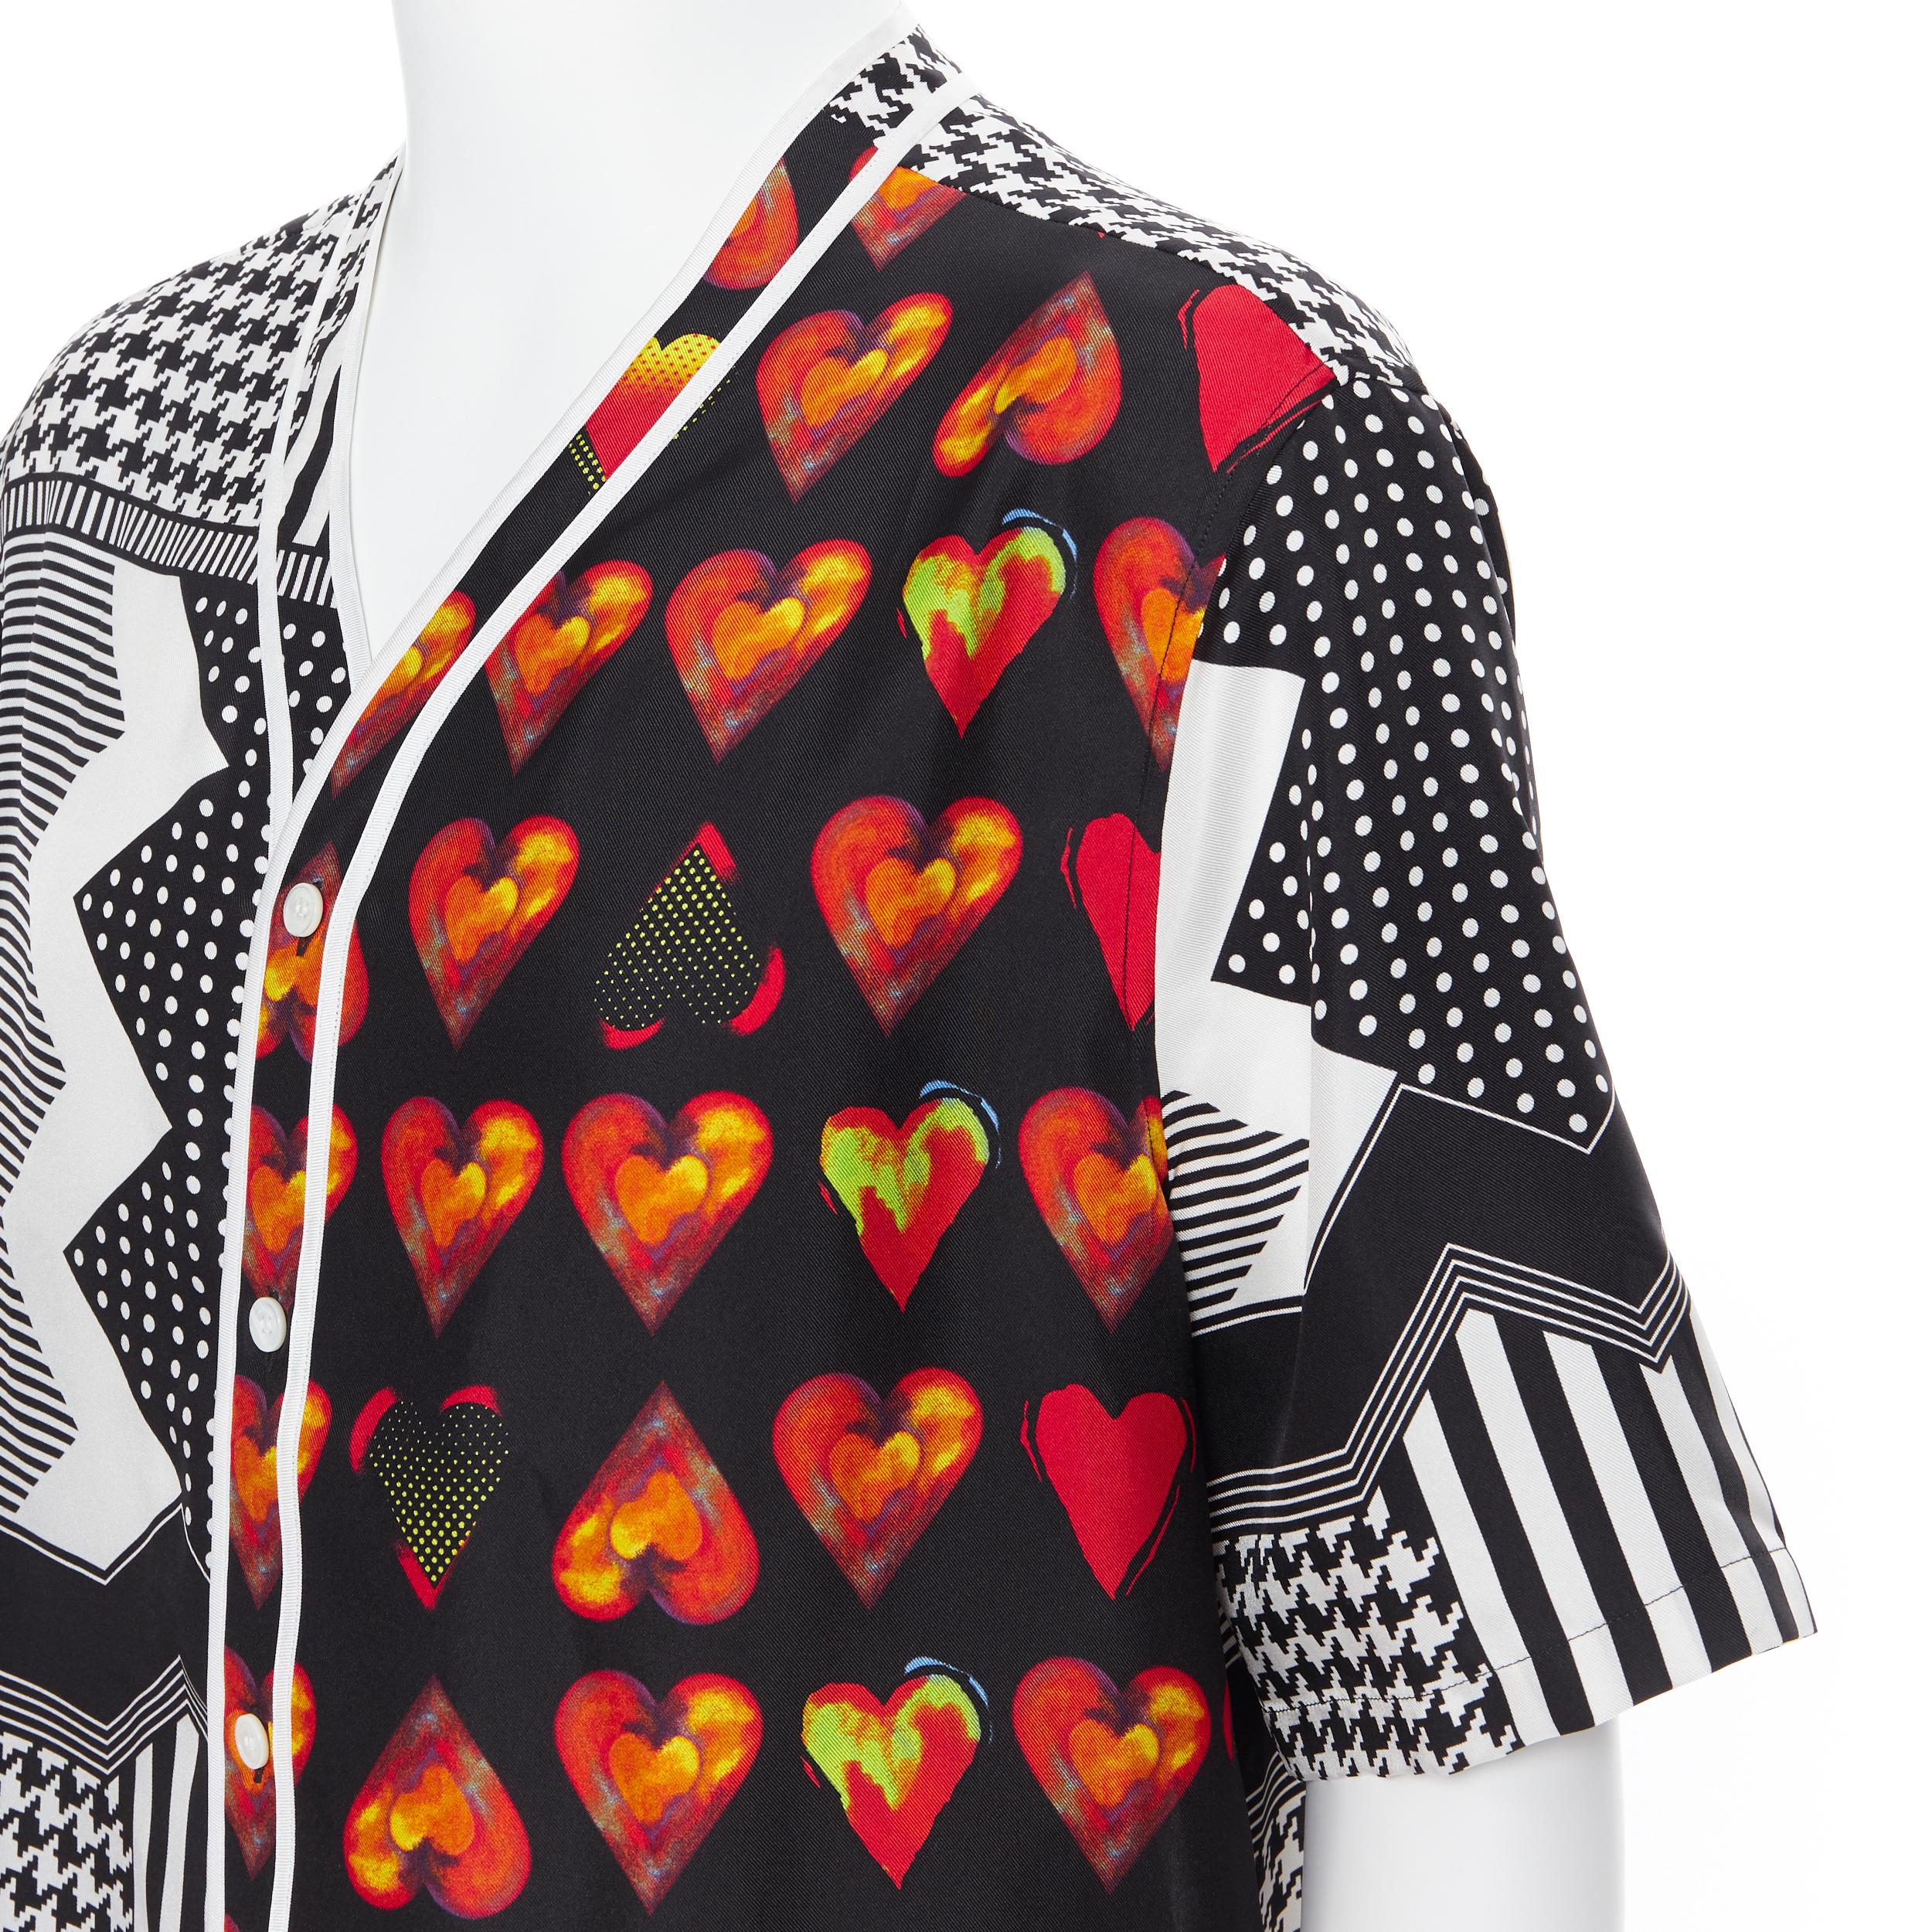 new VERSACE 2019 100% silk Double Love Heart geometric baseball shirt EU40 L
Reference: TGAS/B00084
Brand: Versace
Designer: Donatella Versace
Collection: Pre Fall 2019 
Material: Silk
Color: Black
Pattern: Abstract
Closure: Button
Extra Detail: